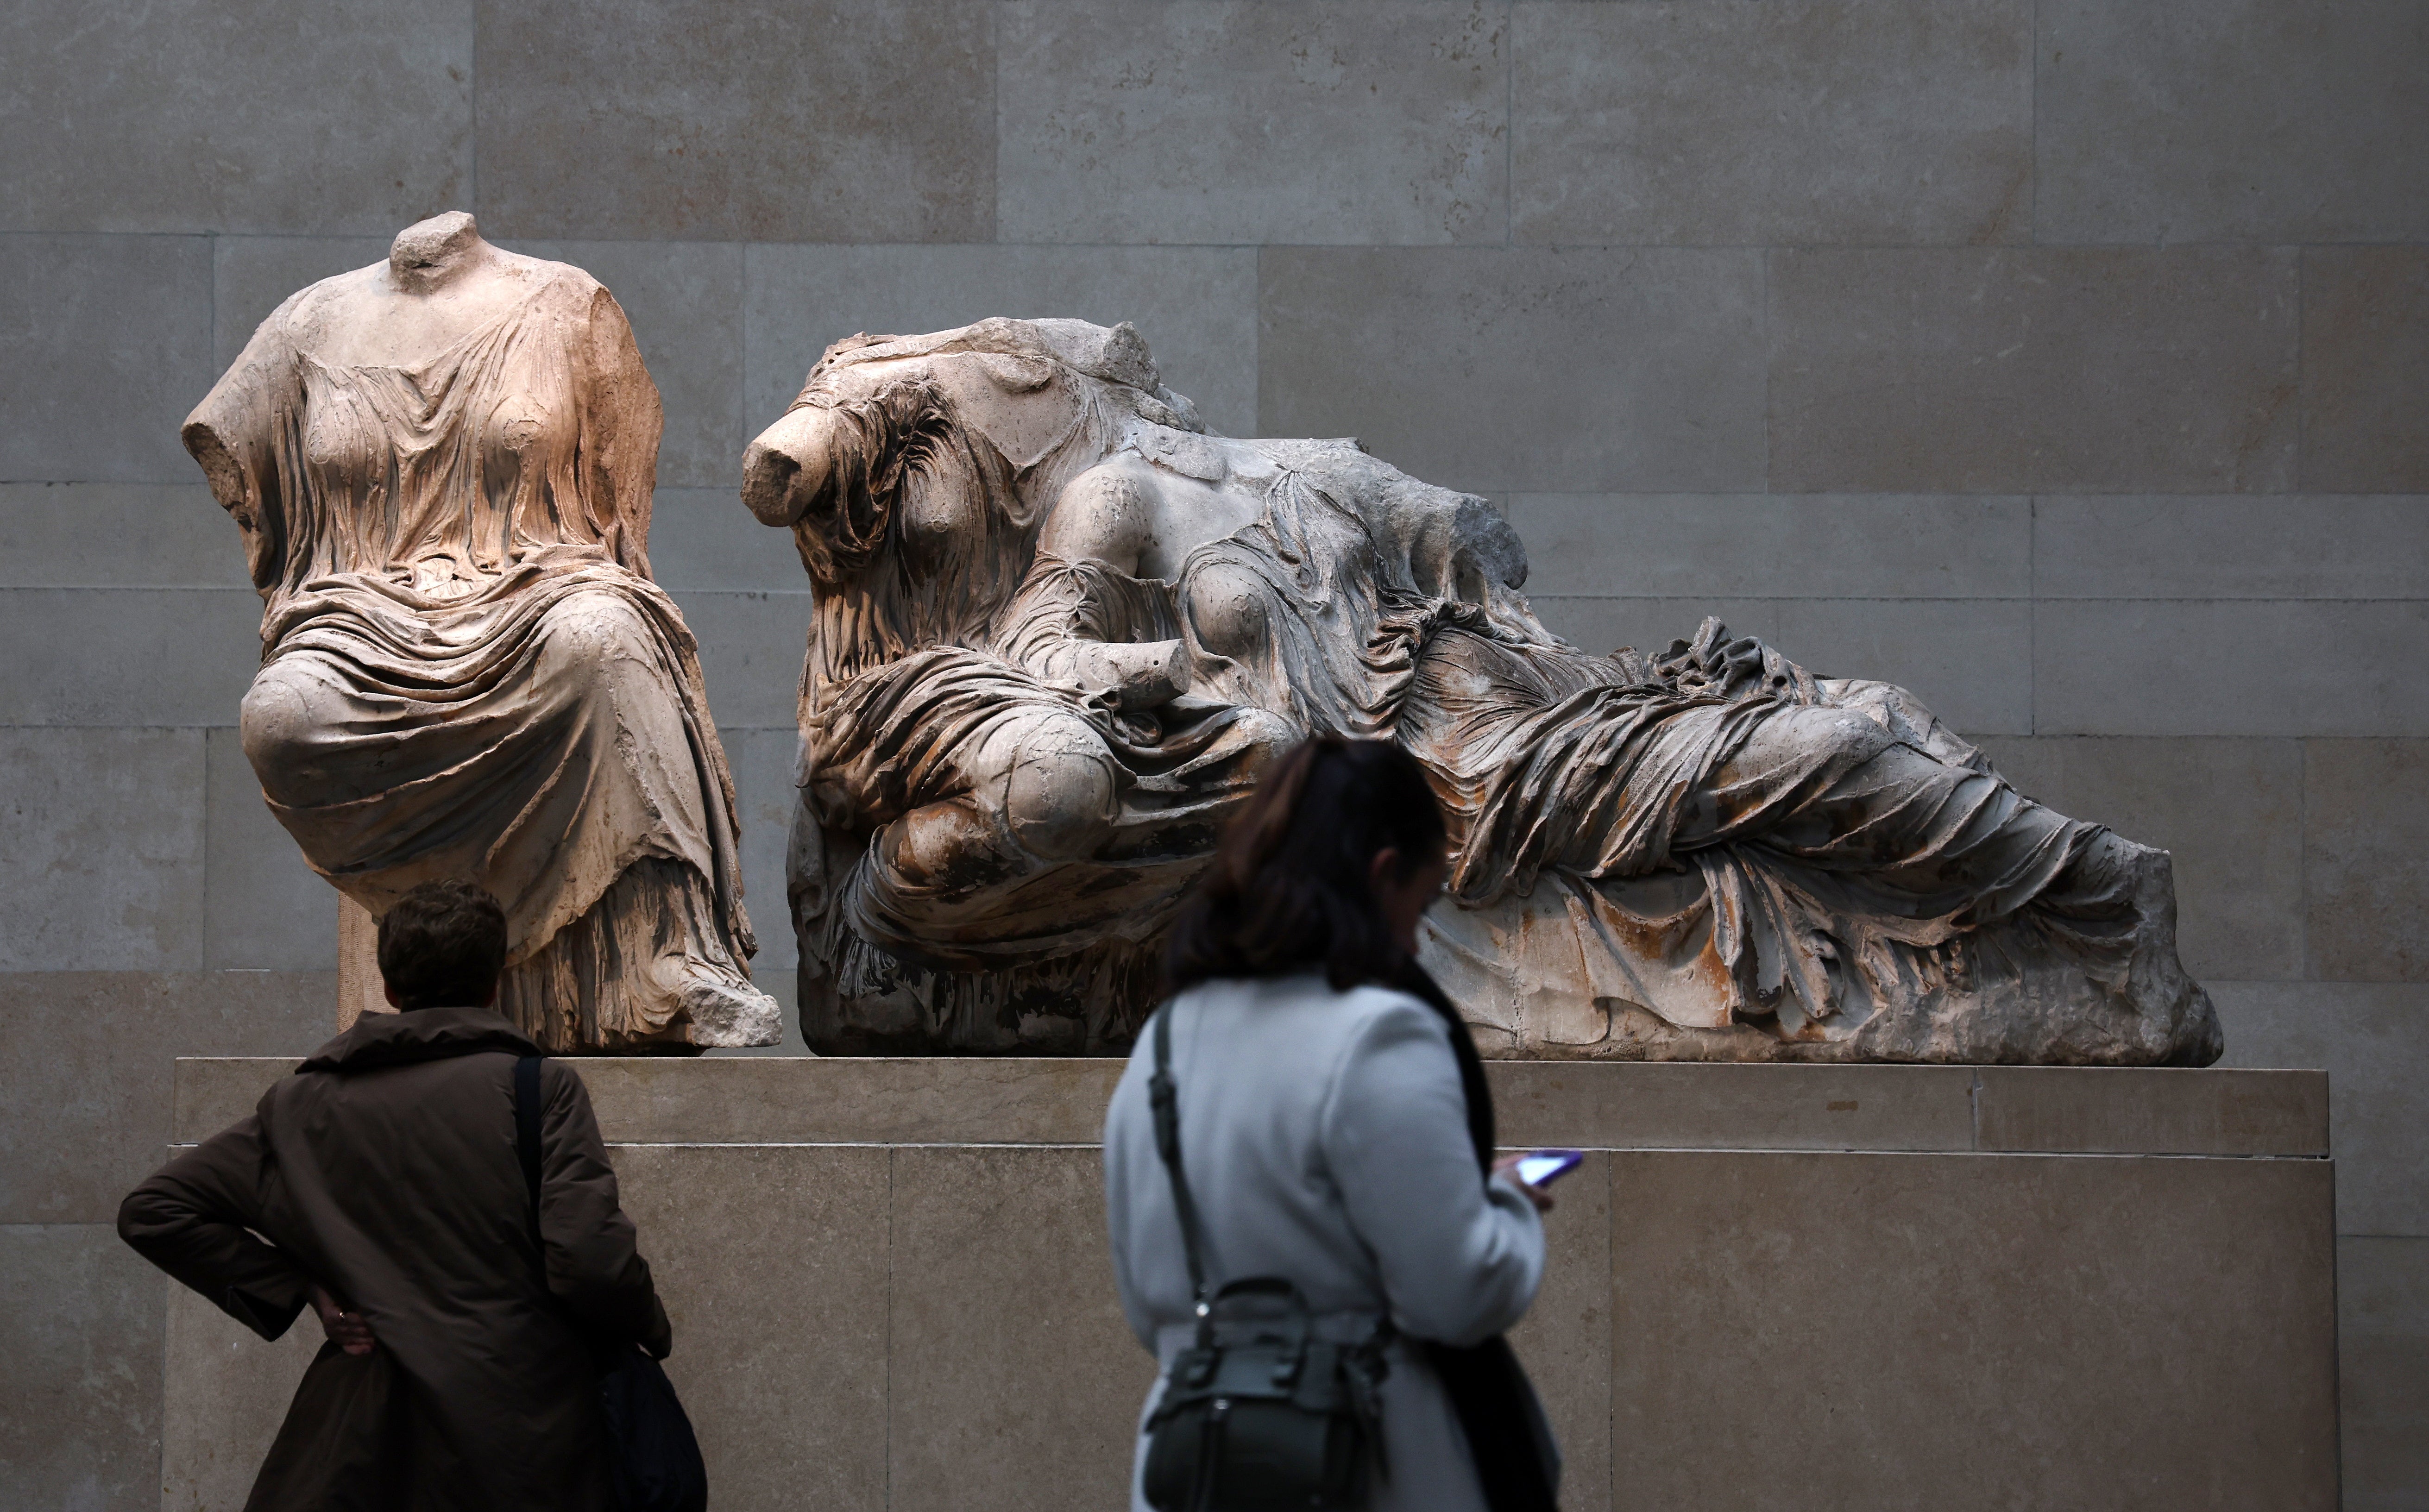 Visitors look at the Parthenon marbles at the British Museum